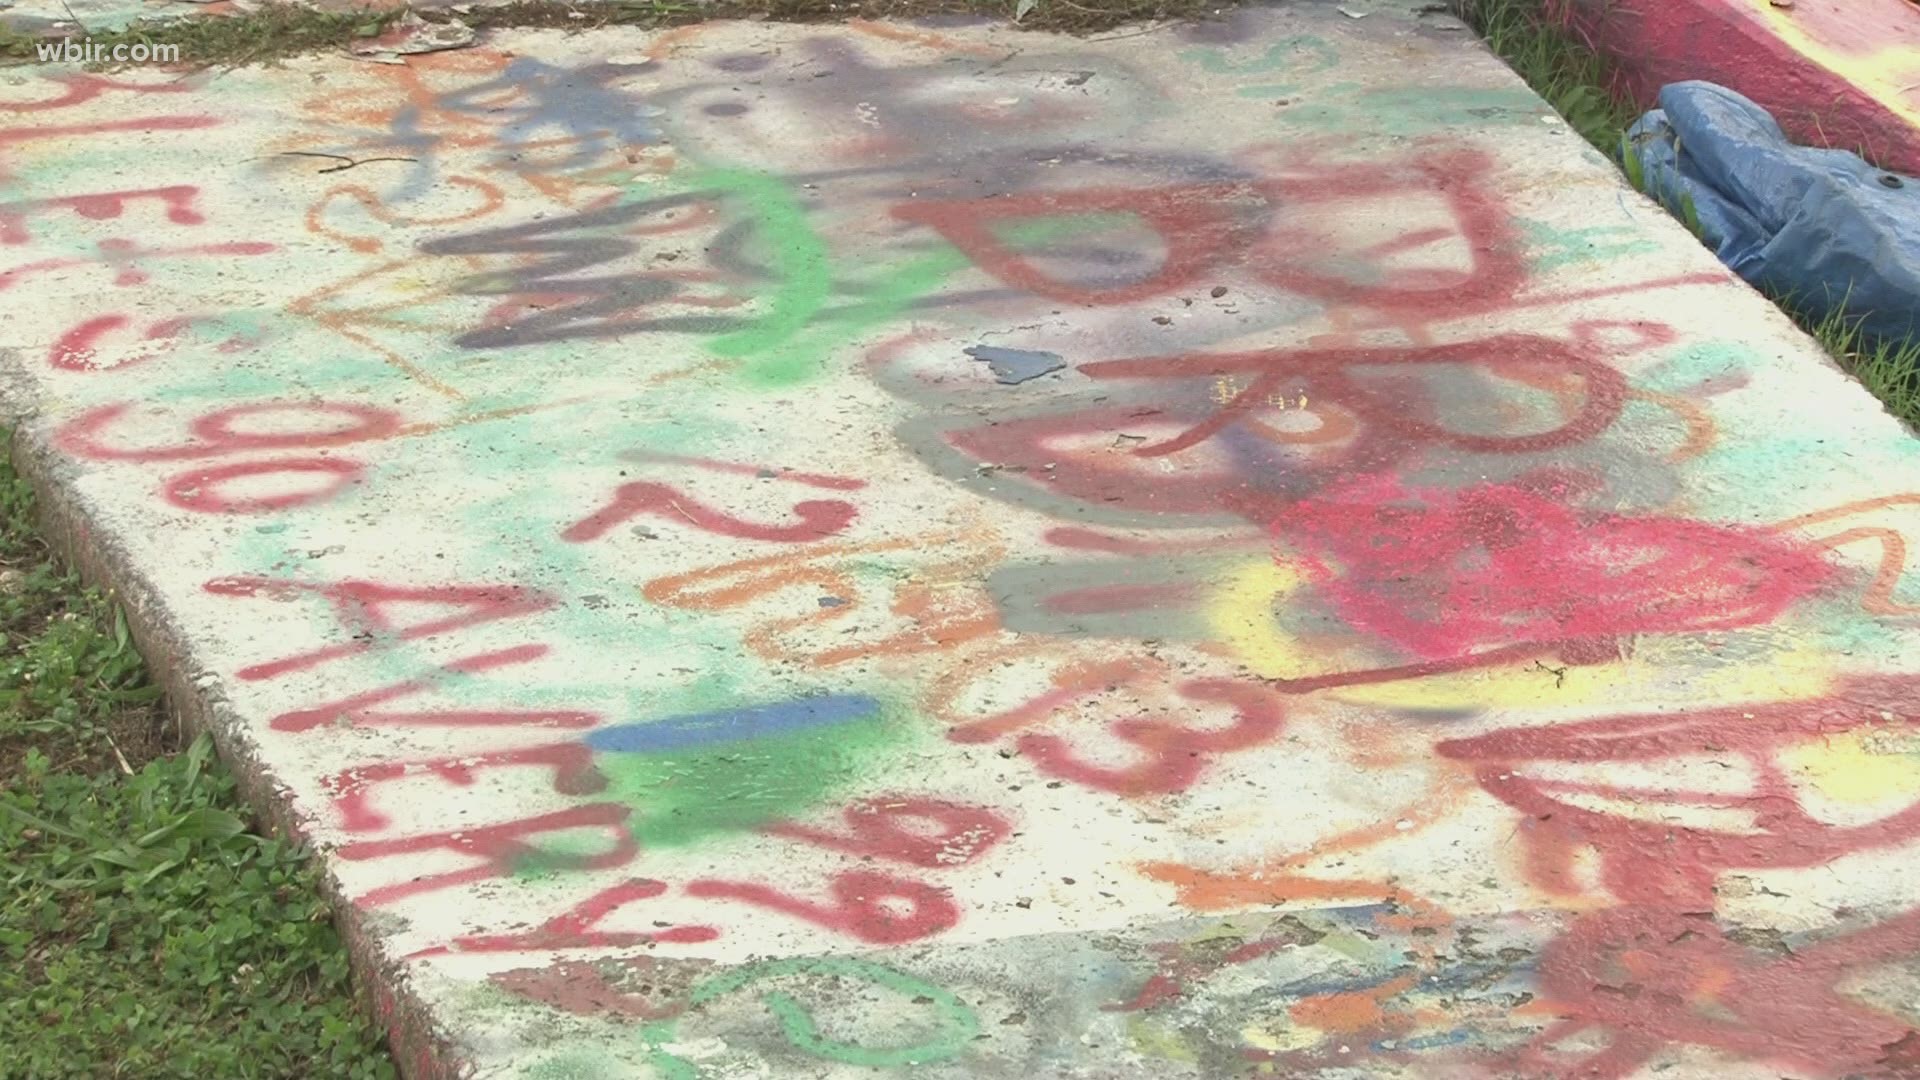 The Alcoa Police Department is asking the community not to paint the sidewalks alongside a popular bridge known for its community art.